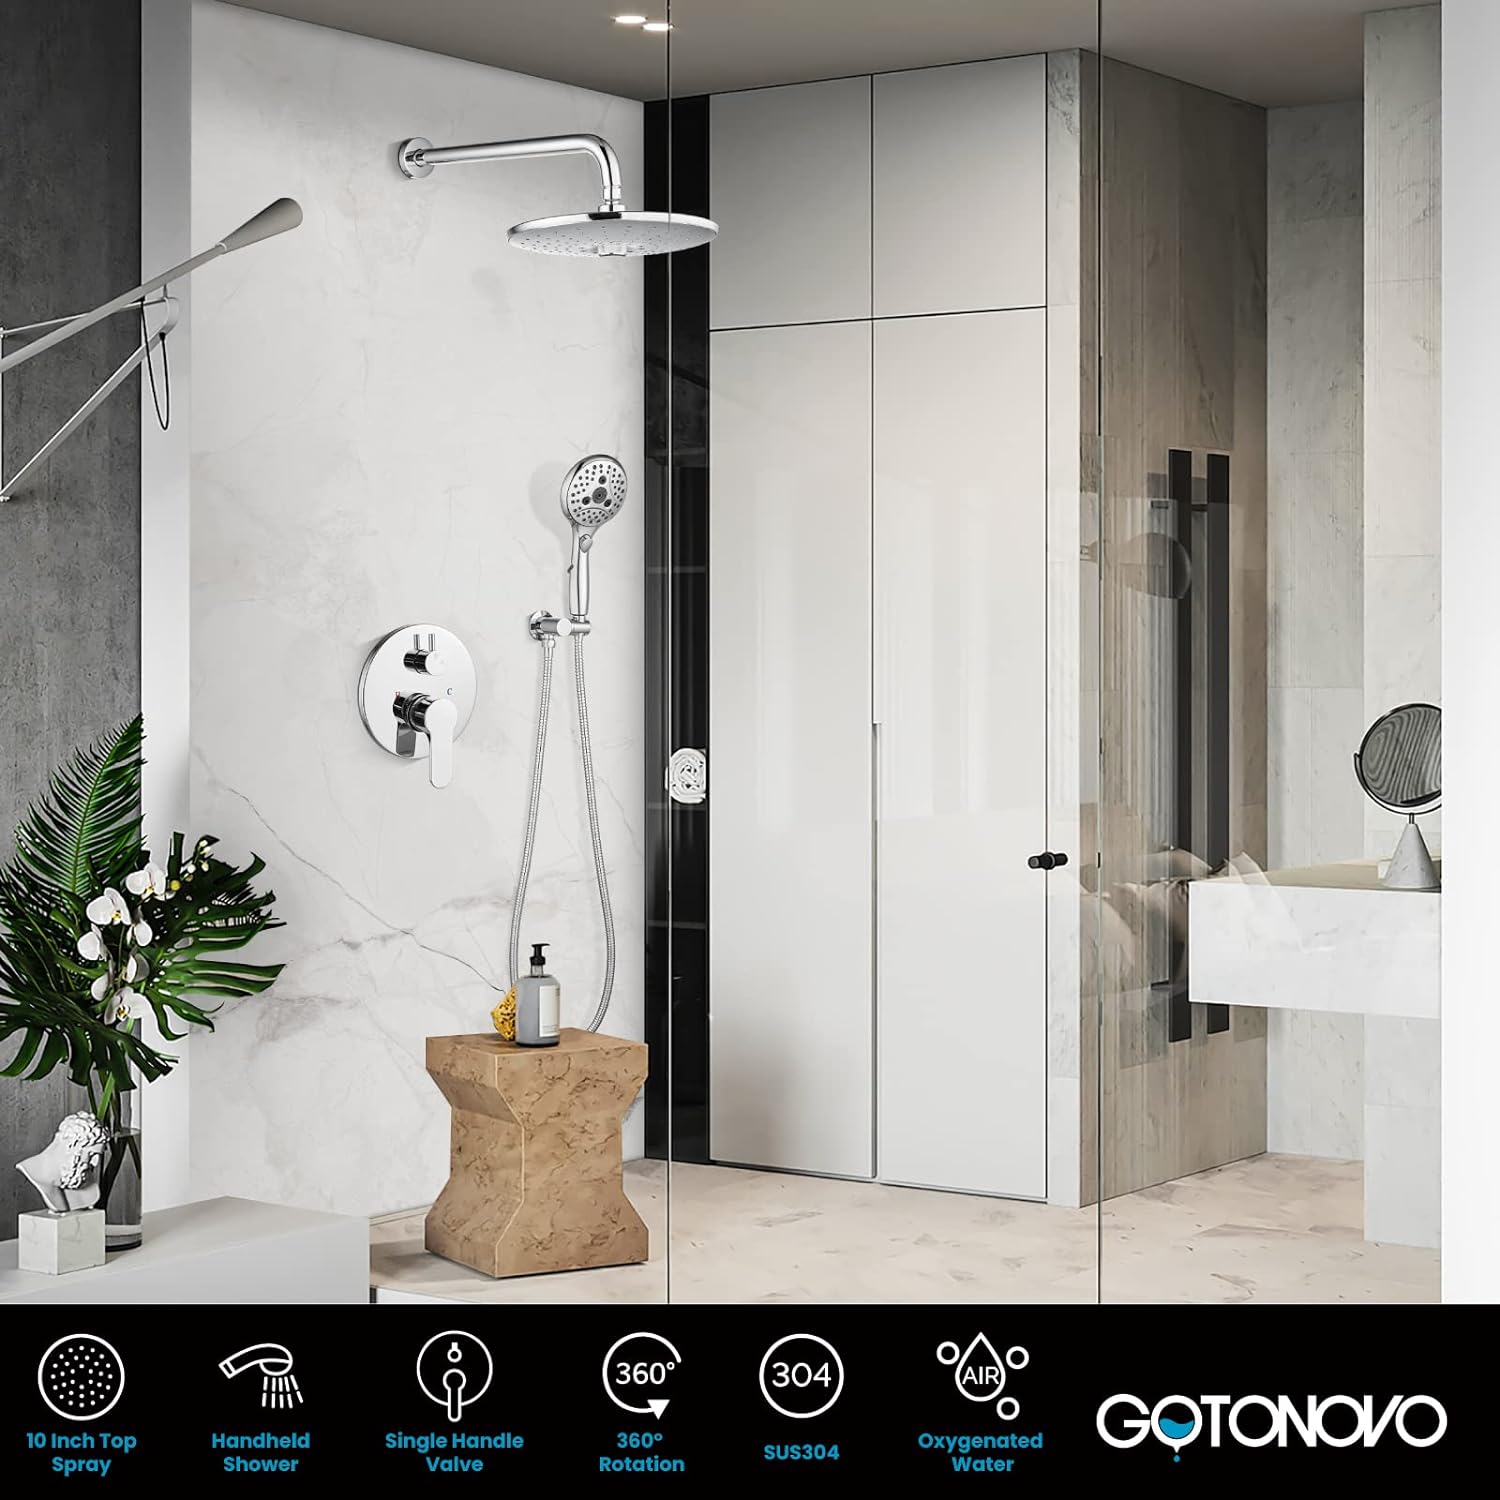 gotonovo Shower Trim Kit Polished Chrome 10 inch 3 Modes Round Rainfall Shower Head Wall Mounted 6-Functions ABS Handheld Spray Shower System Pressure Balanced Rough-in Valve and Trim Included